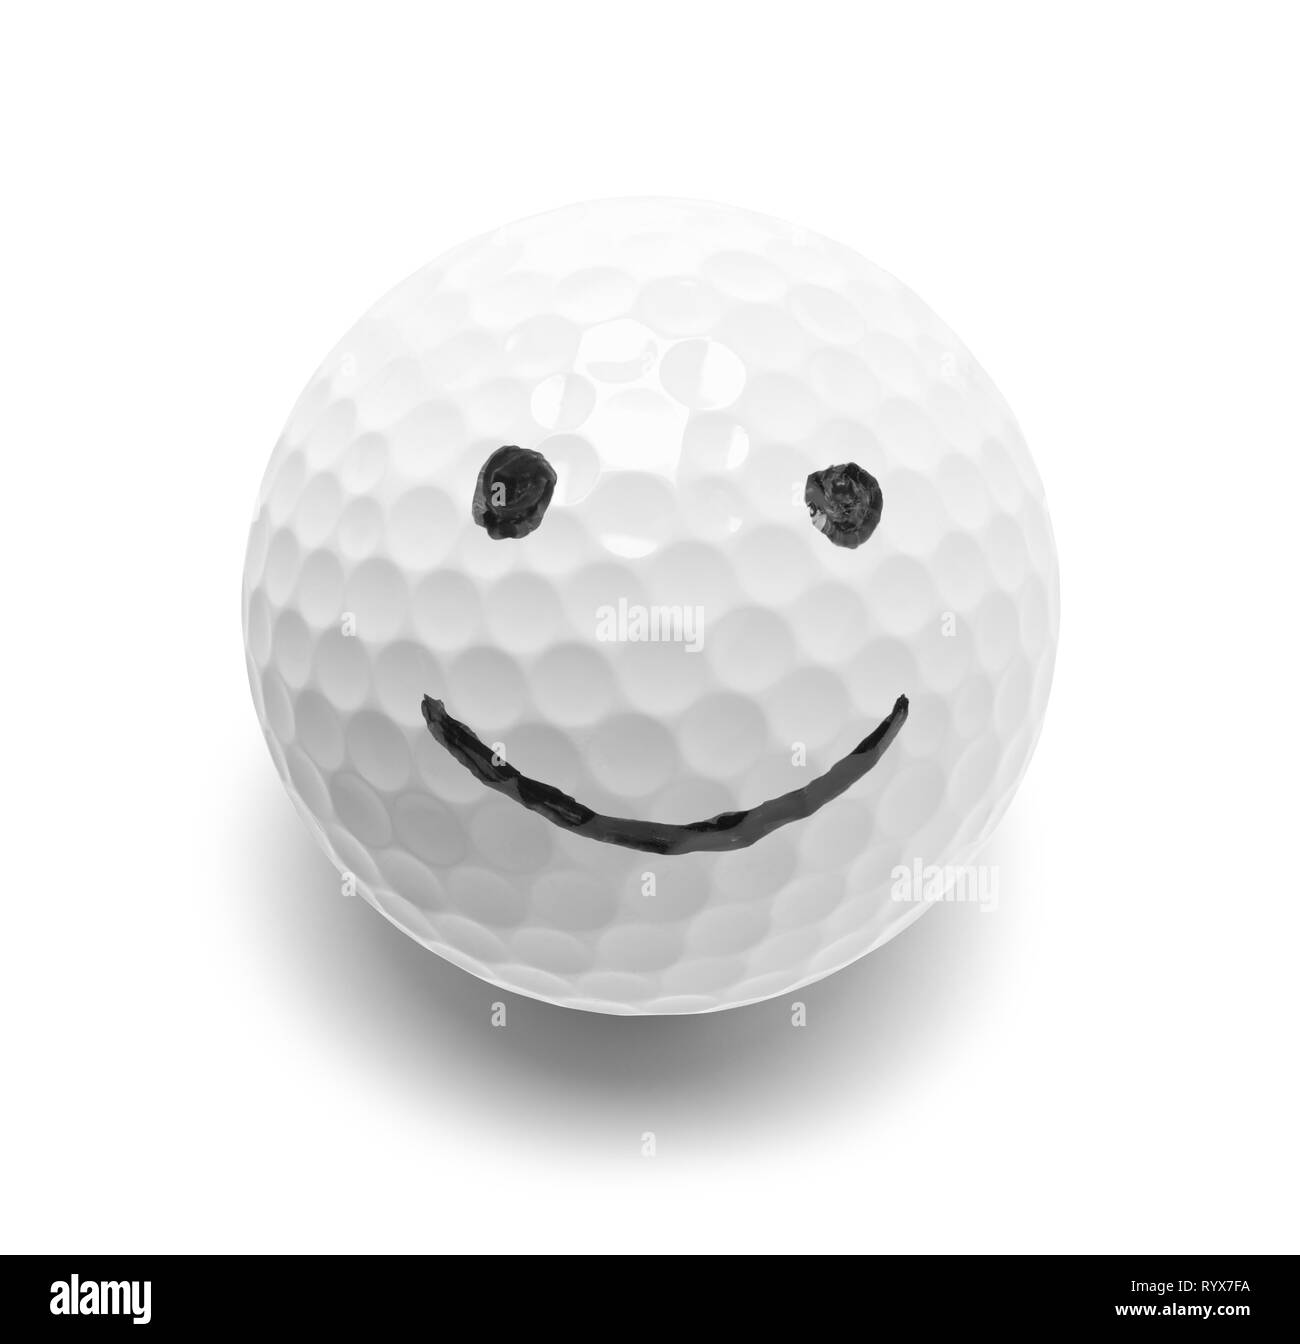 Golf Ball With Smiley Face Isolated on White. Stock Photo